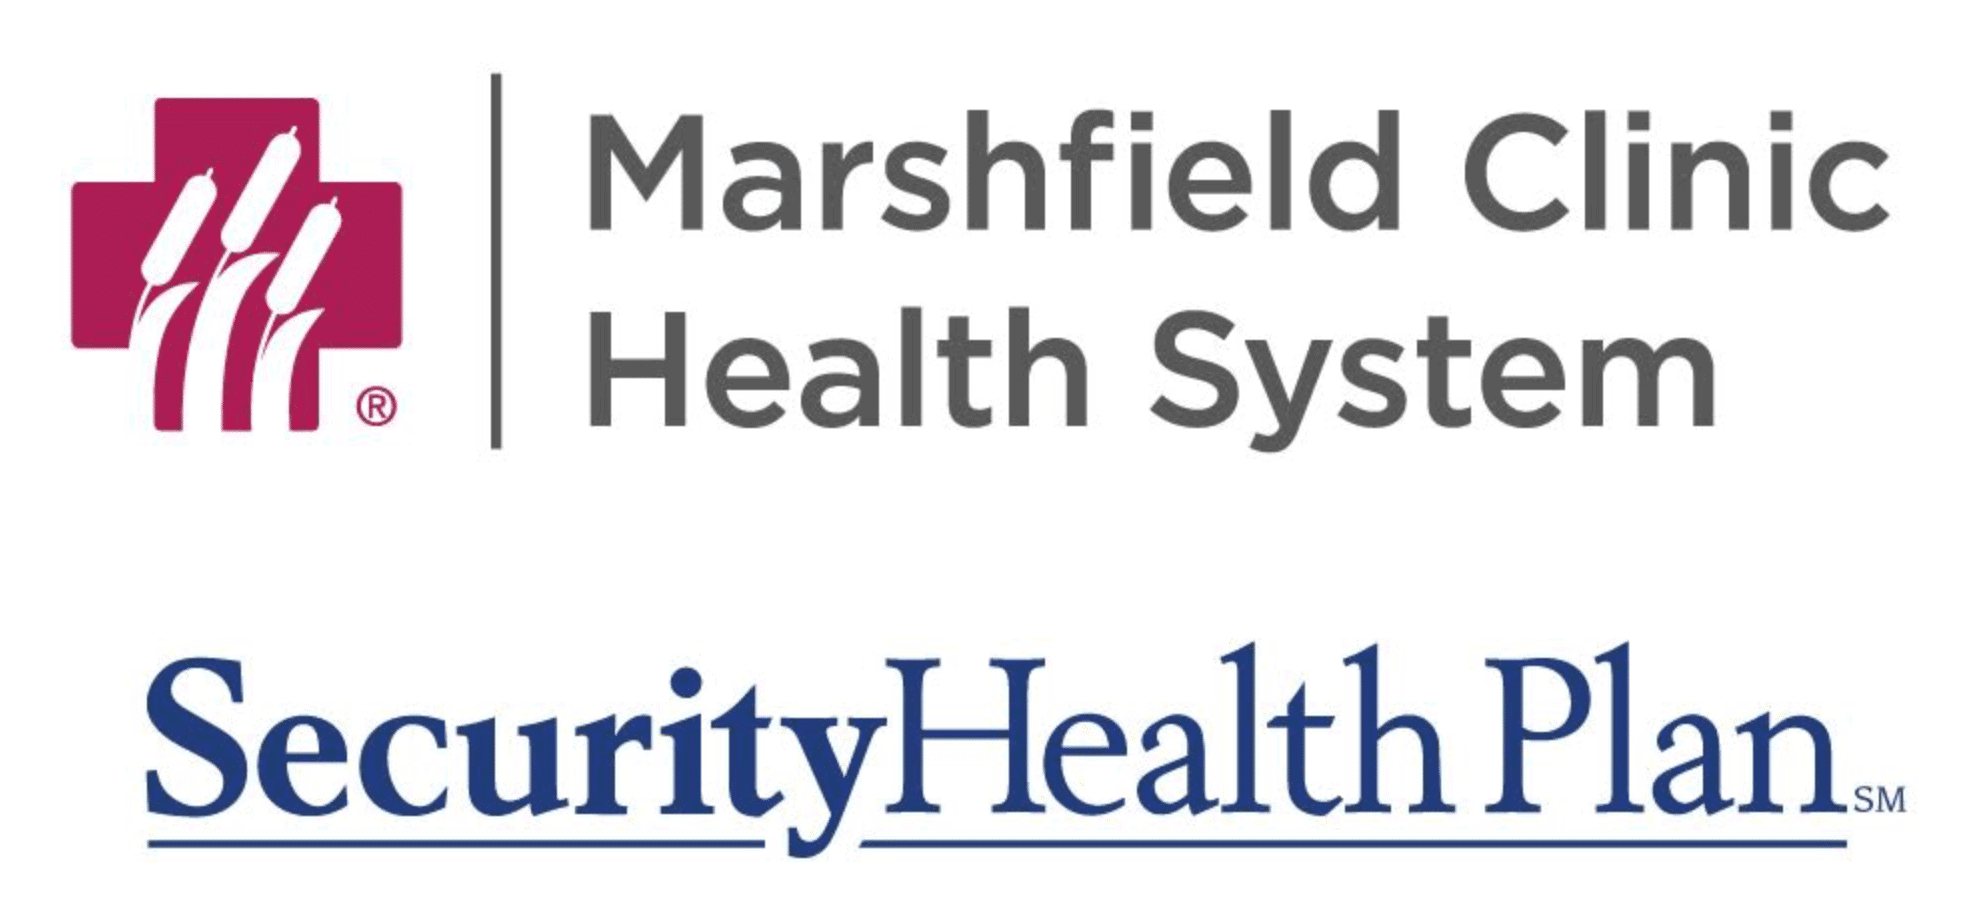 Logos for Marshfield Clinic Health System and Security Health Plan